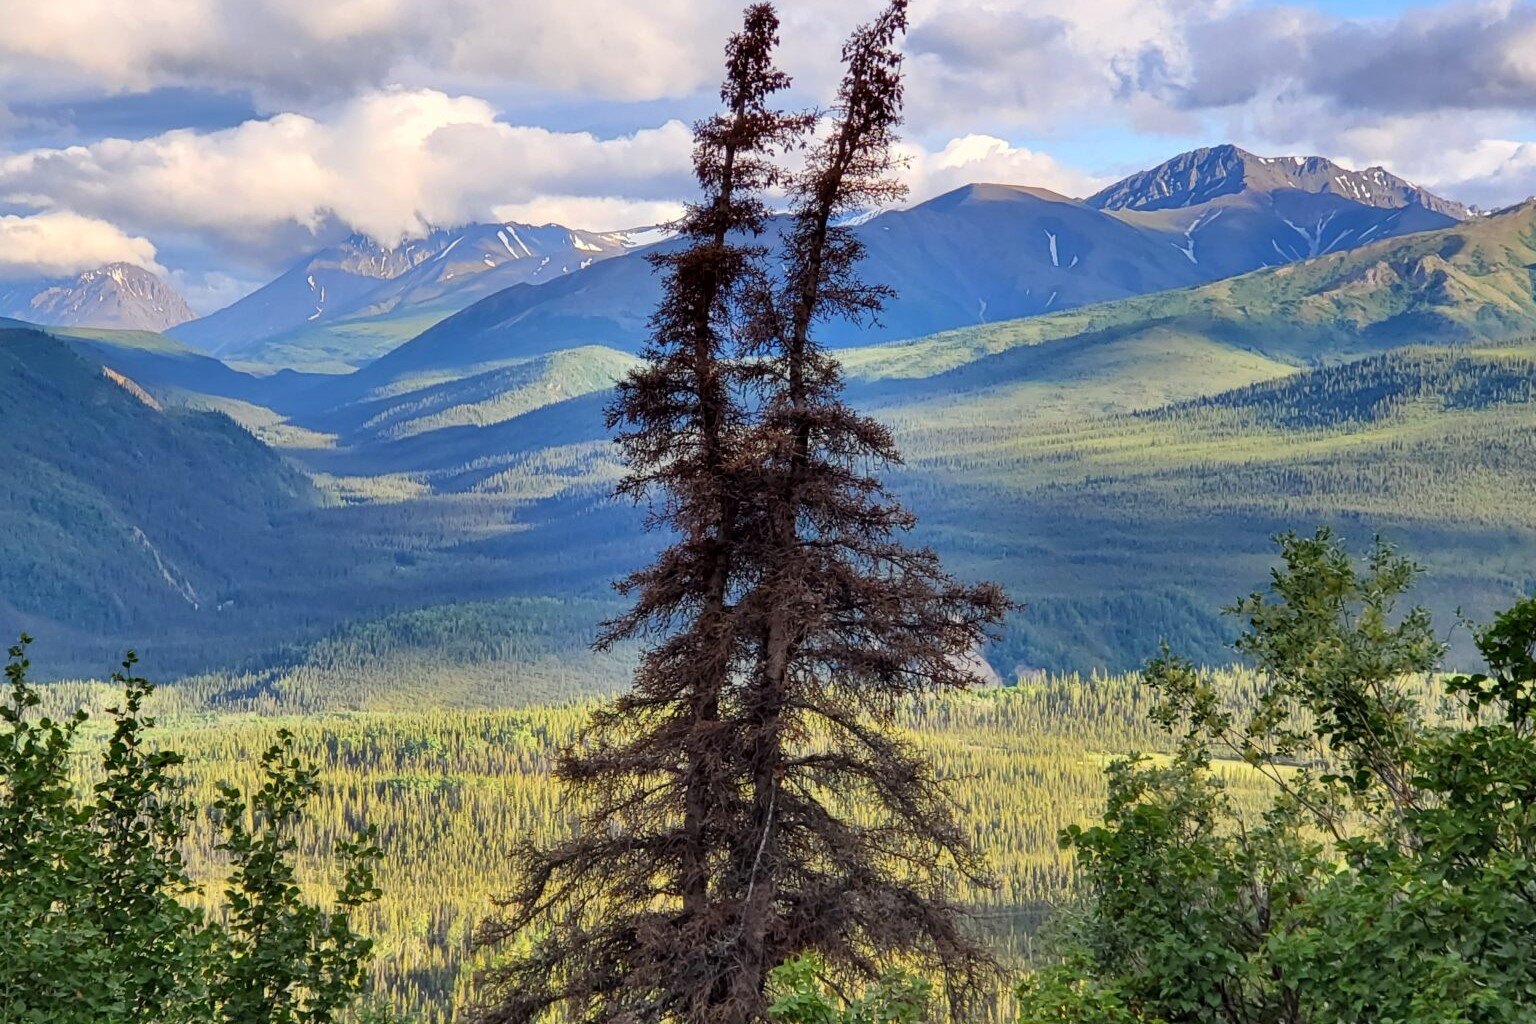 a landscape with mountains and a tree killed by beetles